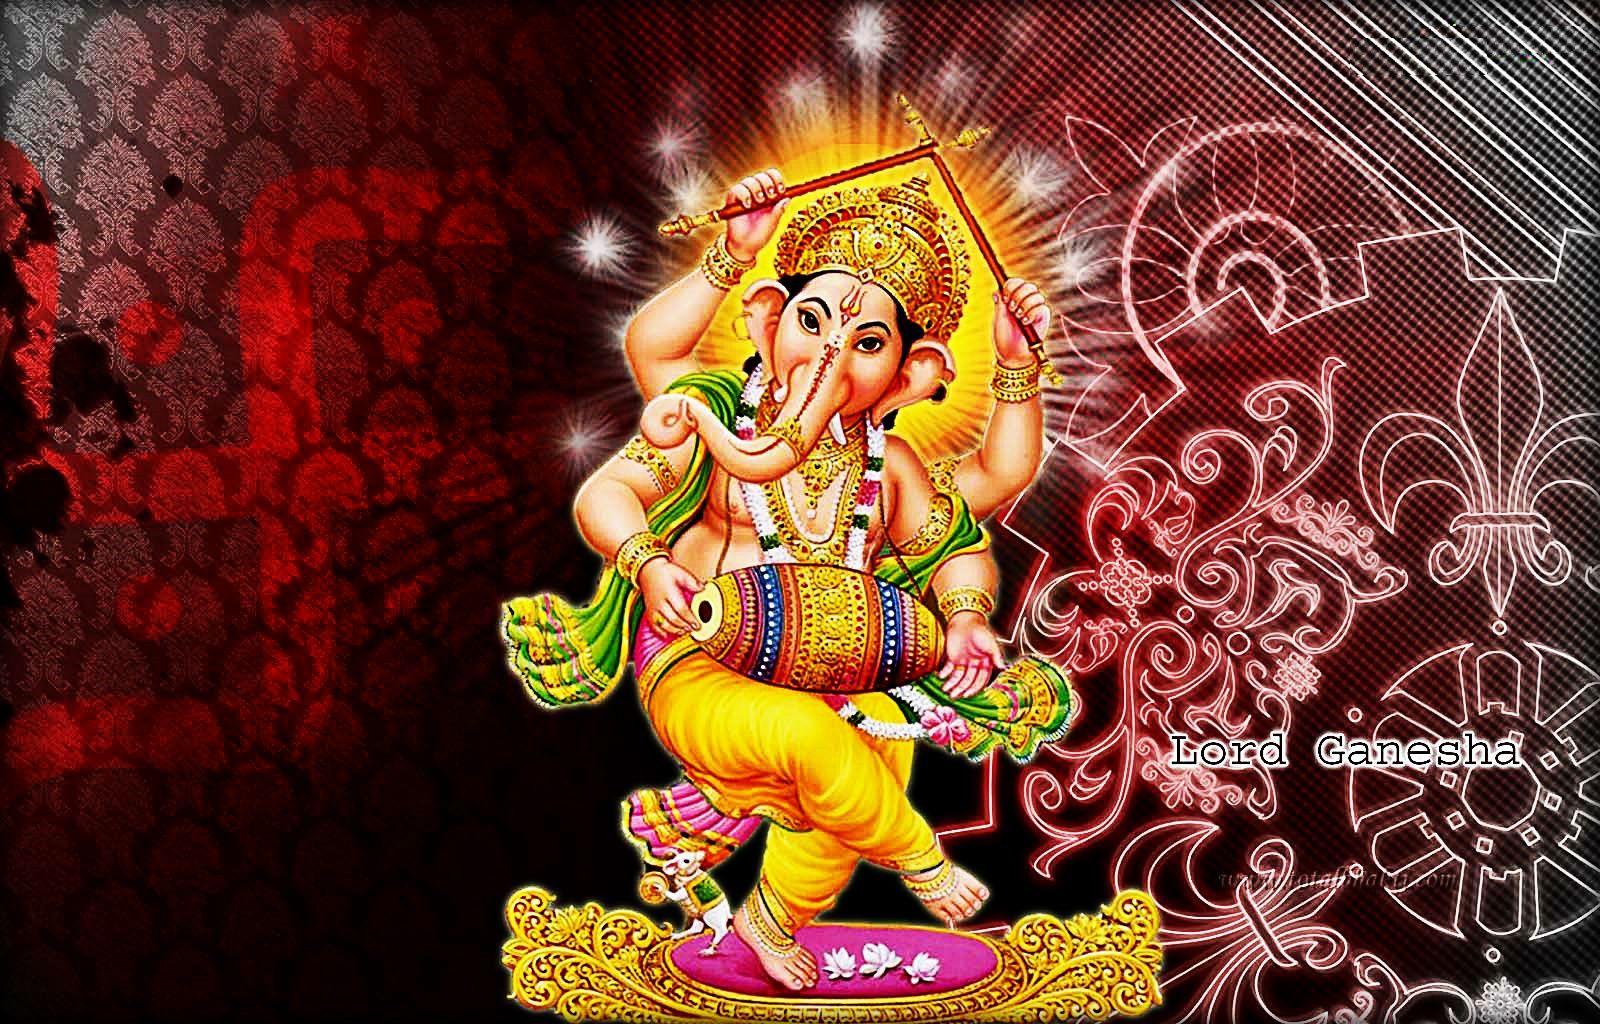 Lord Ganpati Background For Ganesh Chaturthi Festival Of India With Message  Meaning My Lord Ganesha Stock Illustration  Download Image Now  iStock